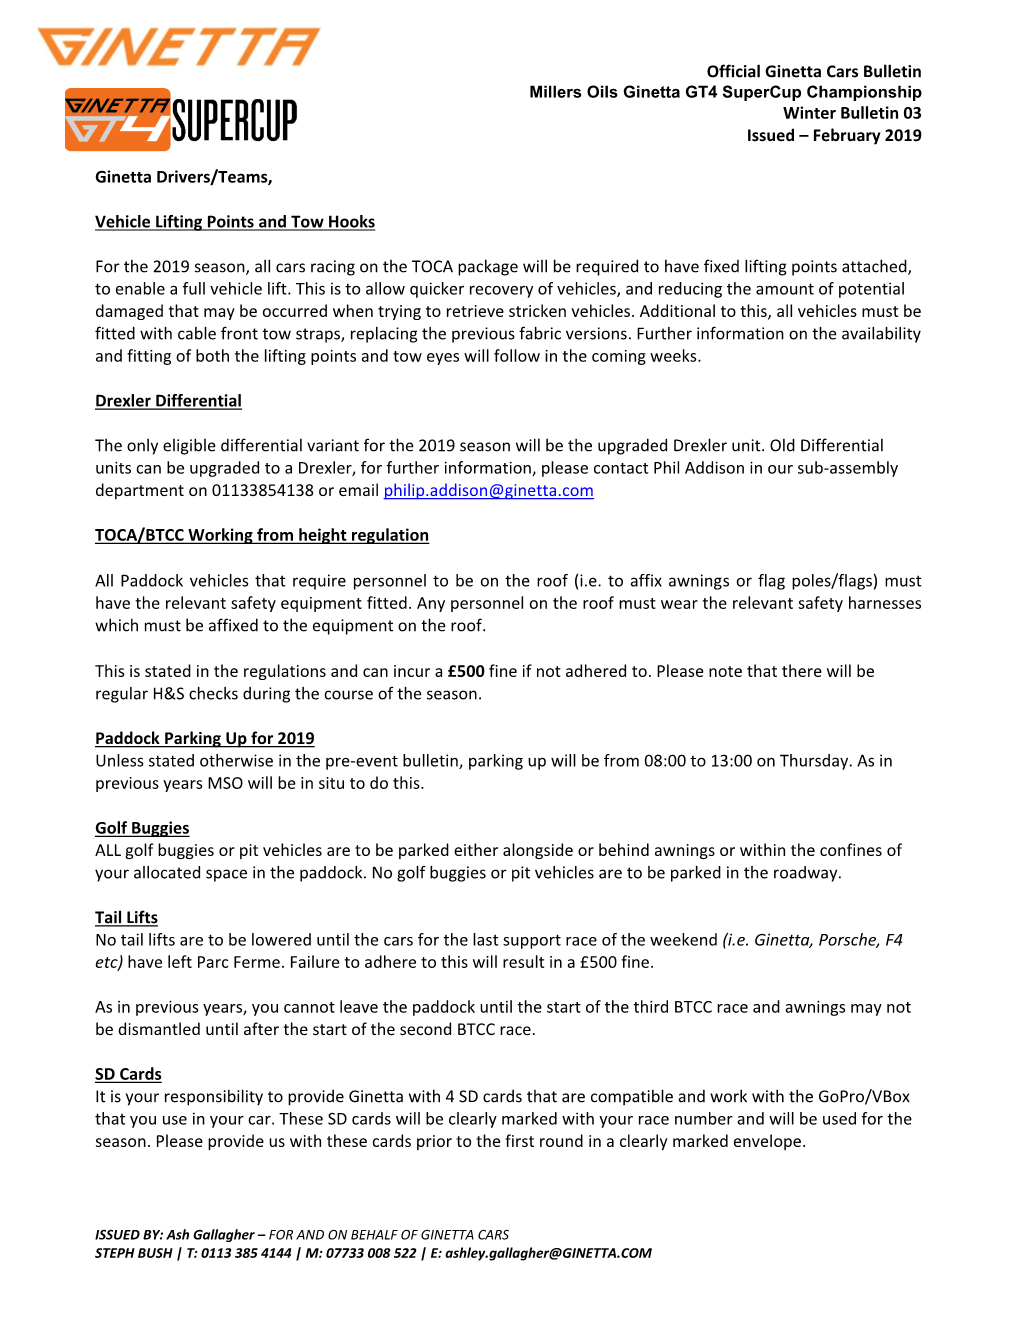 Official Ginetta Cars Bulletin Winter Bulletin 03 Issued – February 2019 Ginetta Drivers/Teams, Vehicle Lifting Points And